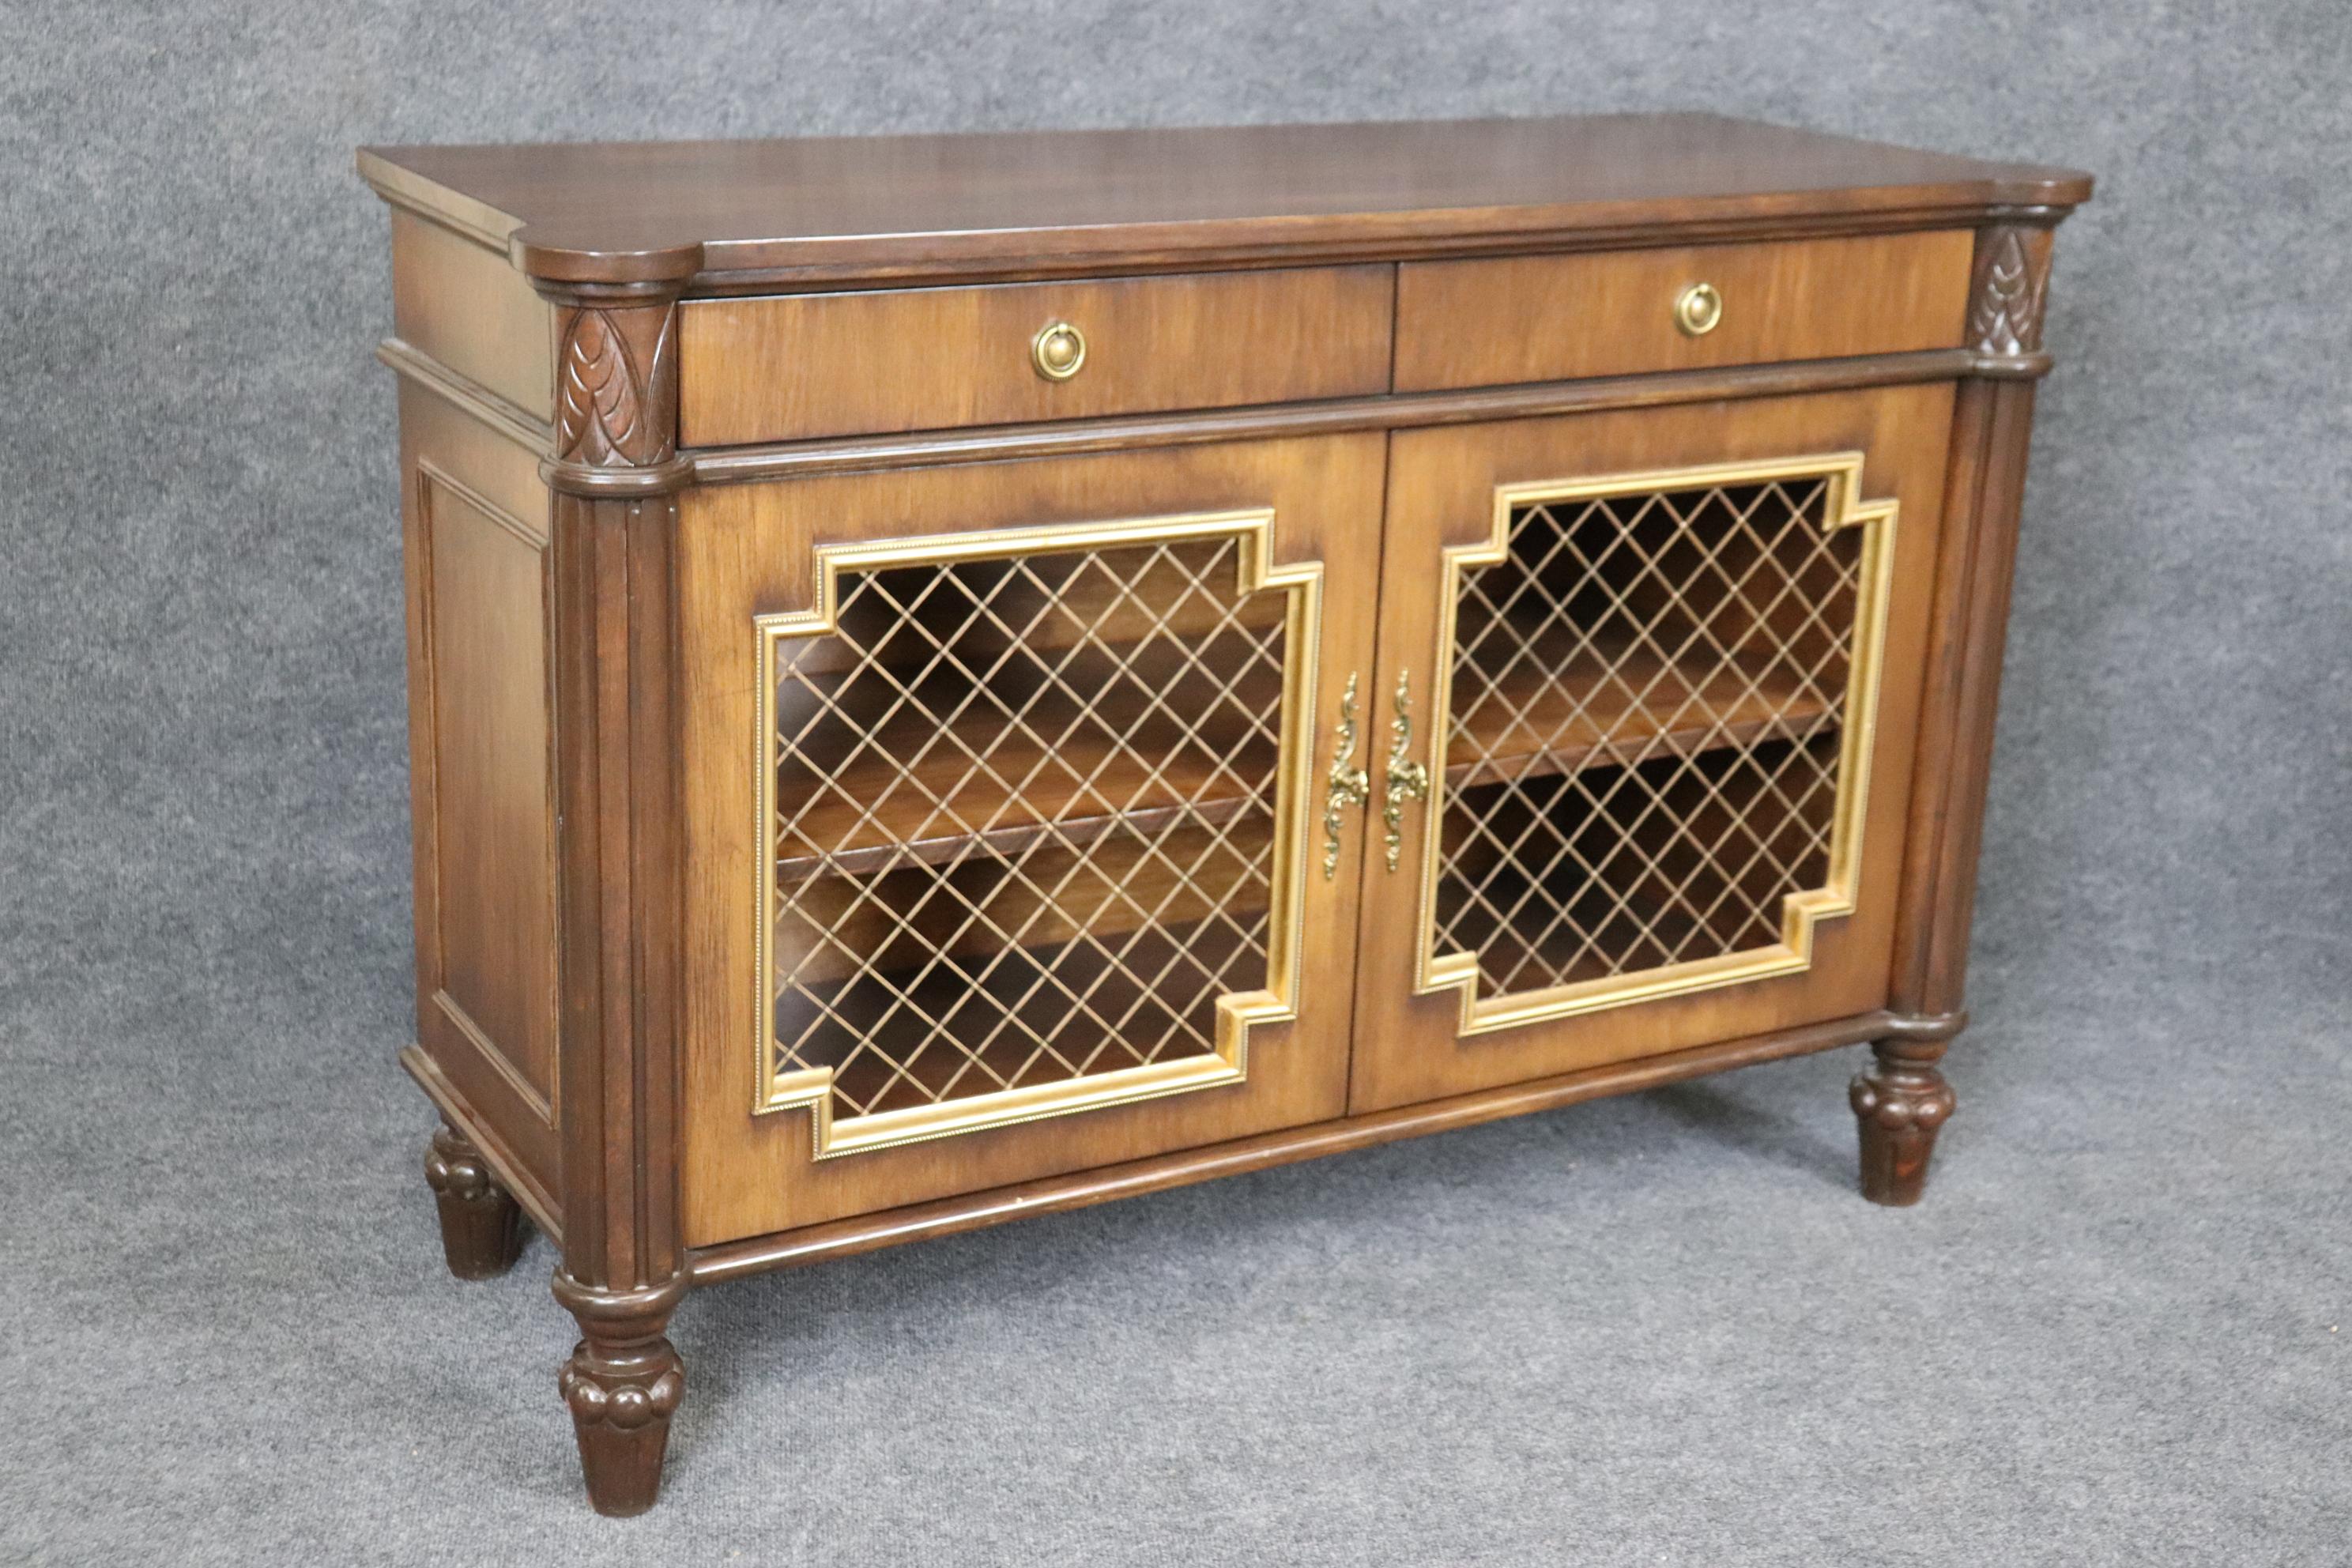 This is a gorgeous pair of American made brass grillwork and gilded mahogany side cabinets or comodes. They are in good condition and are designed in the Louis xvi or directoire style. Measures 48.5 wide x 33.25 x 18.75 deep. They date to t950-60s